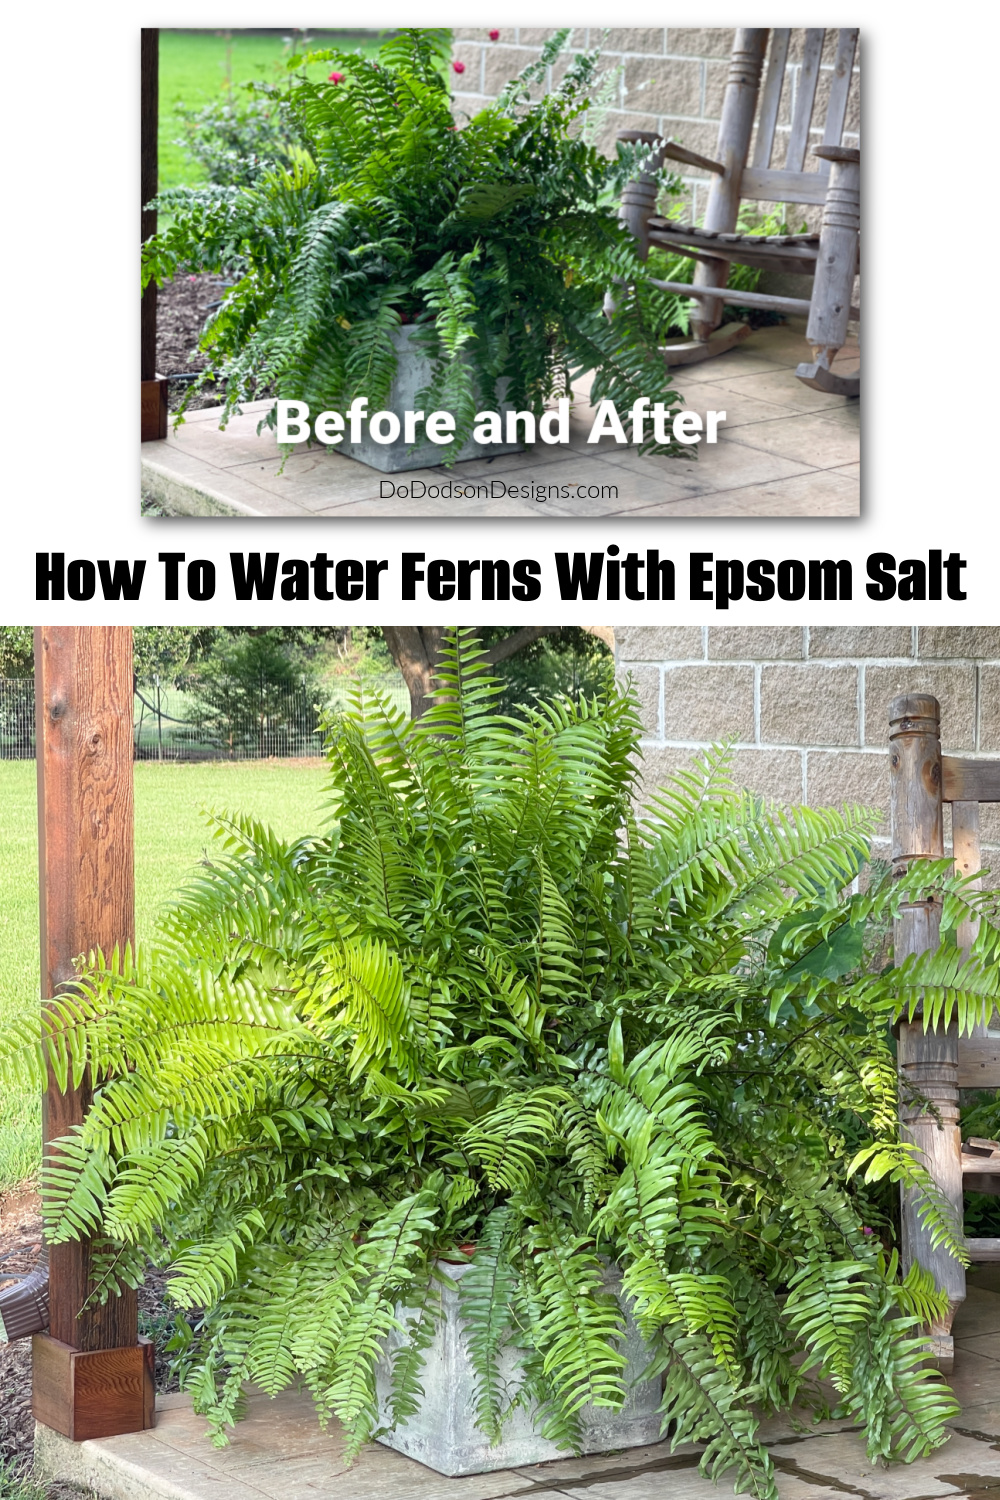 How To Water Ferns With Epsom Salt (Tips and Tricks)